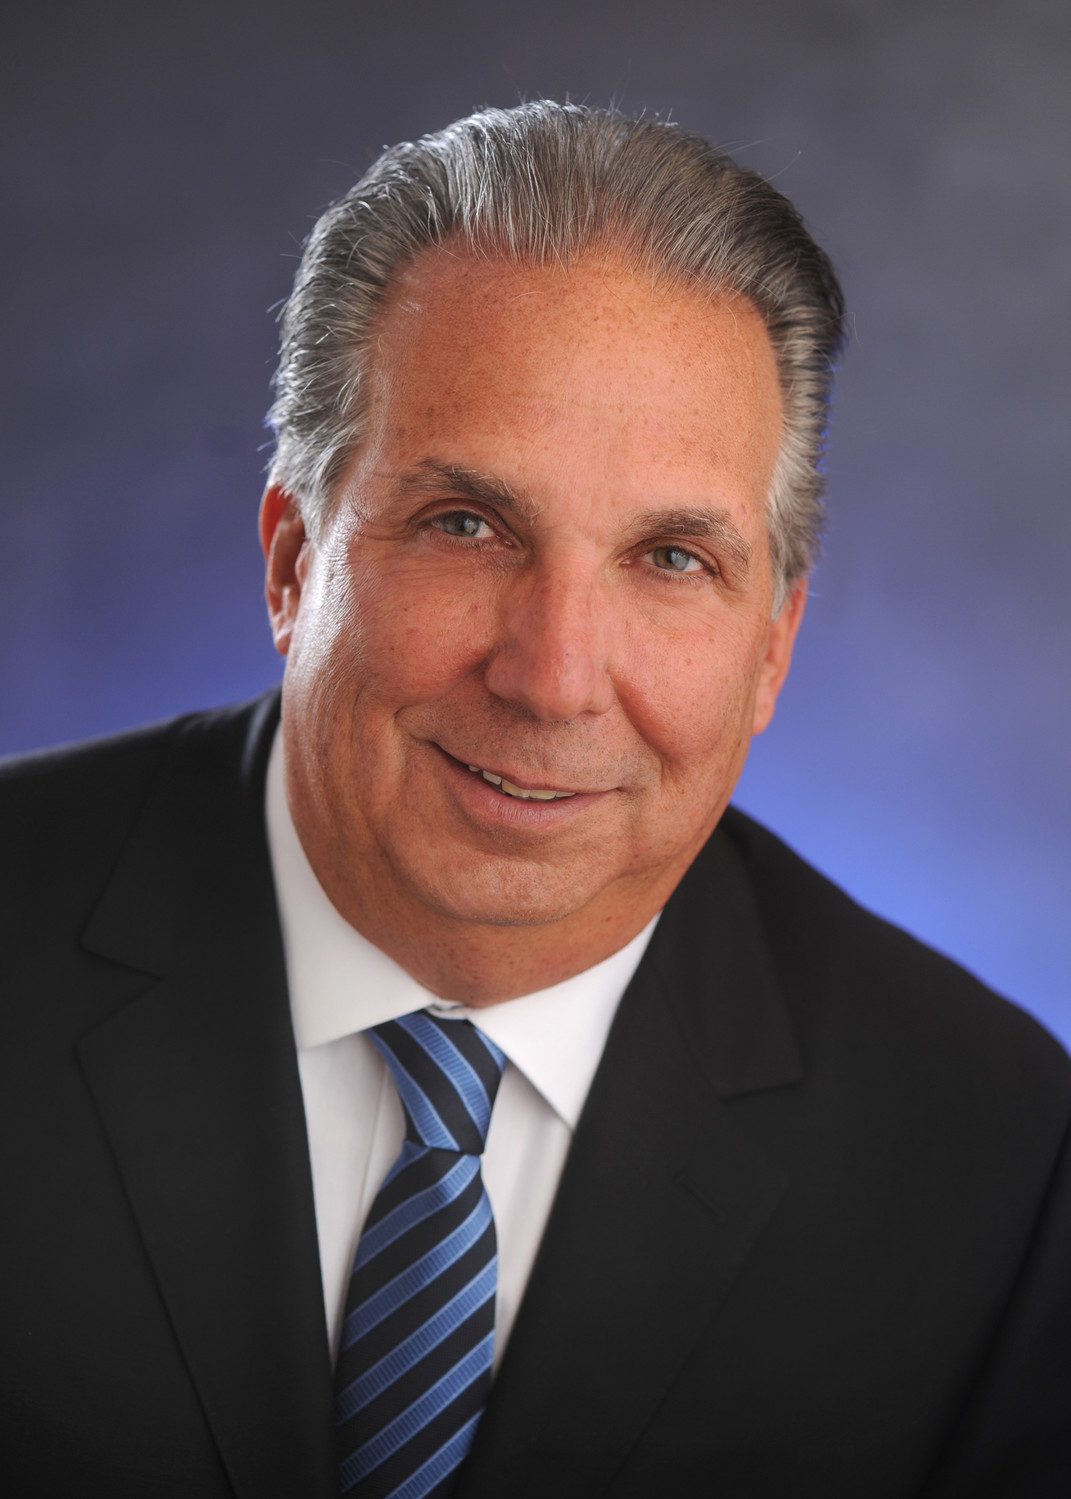 Real estate manager Anthony Ponte, above, from Atlantic Beach, was appointed to South Nassau Communities Hospital’s board of directors.